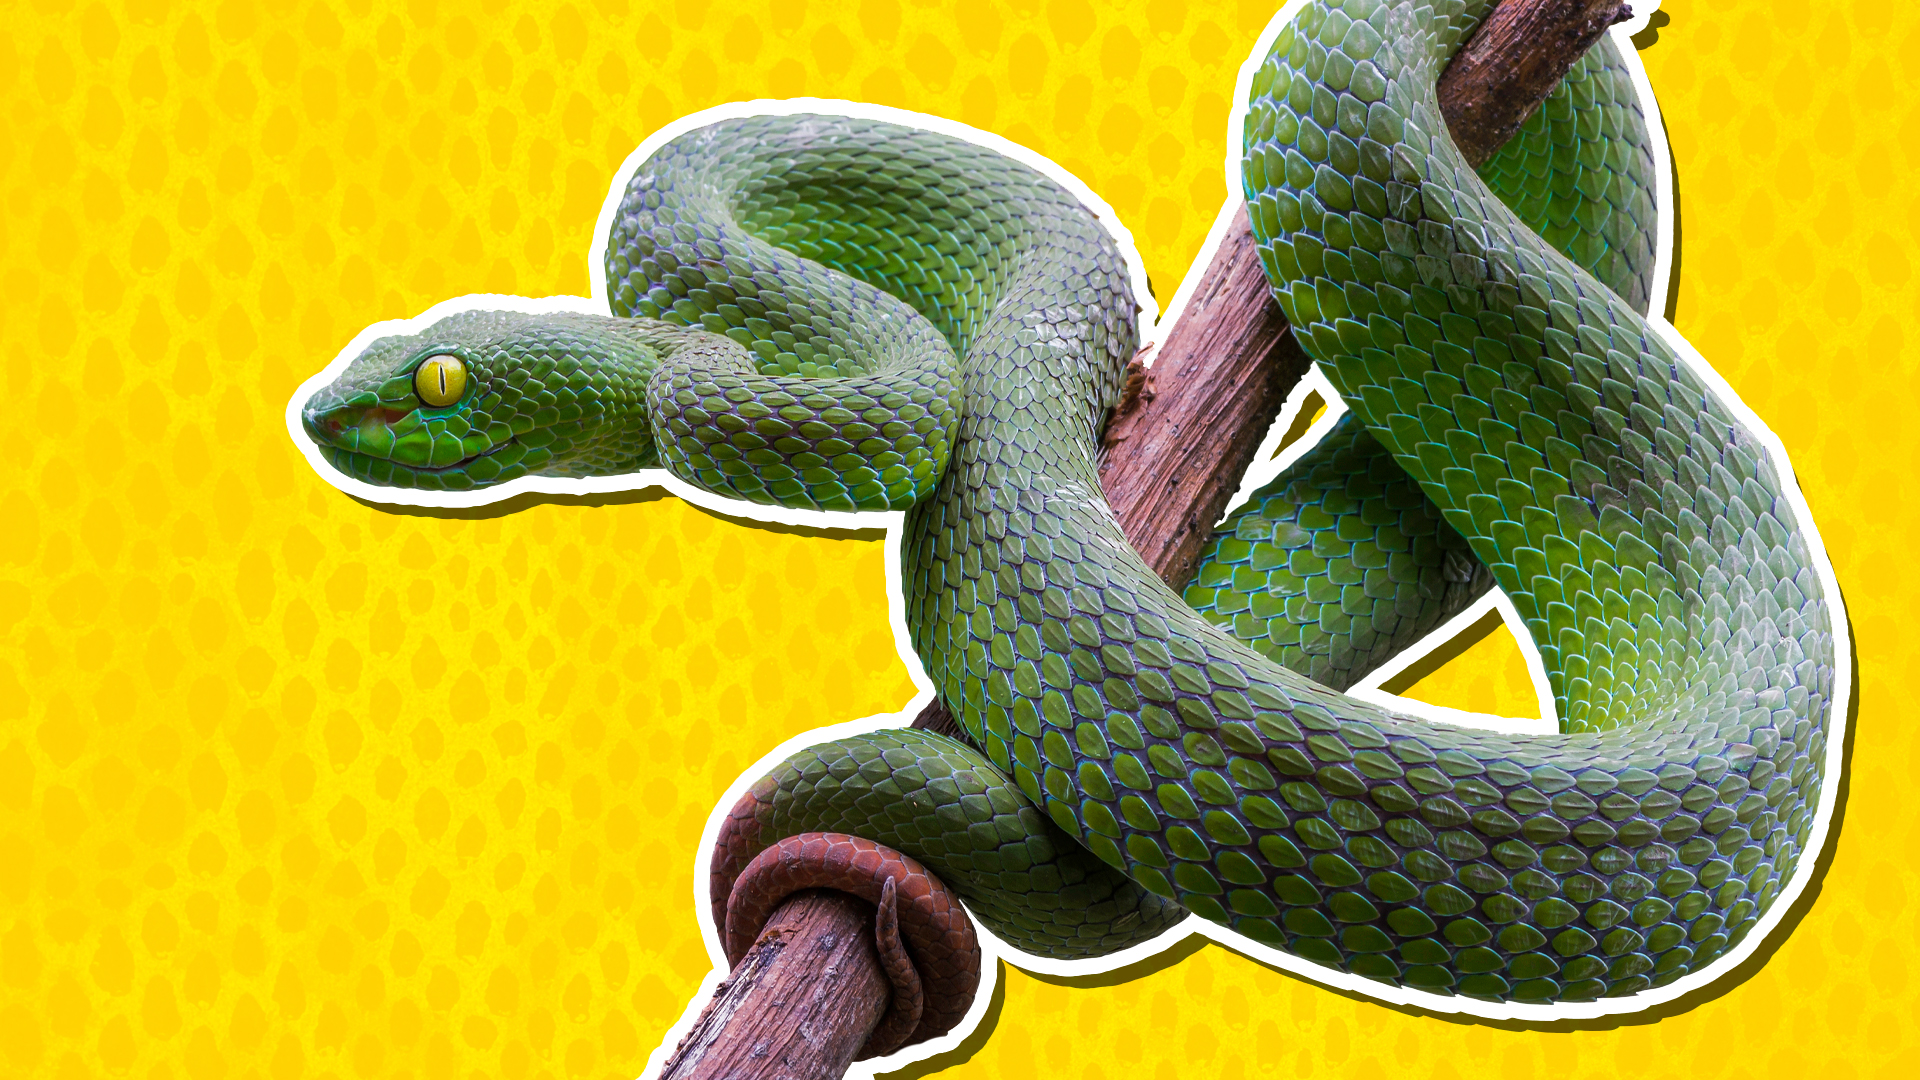 A pit viper wrapped around a tree branch